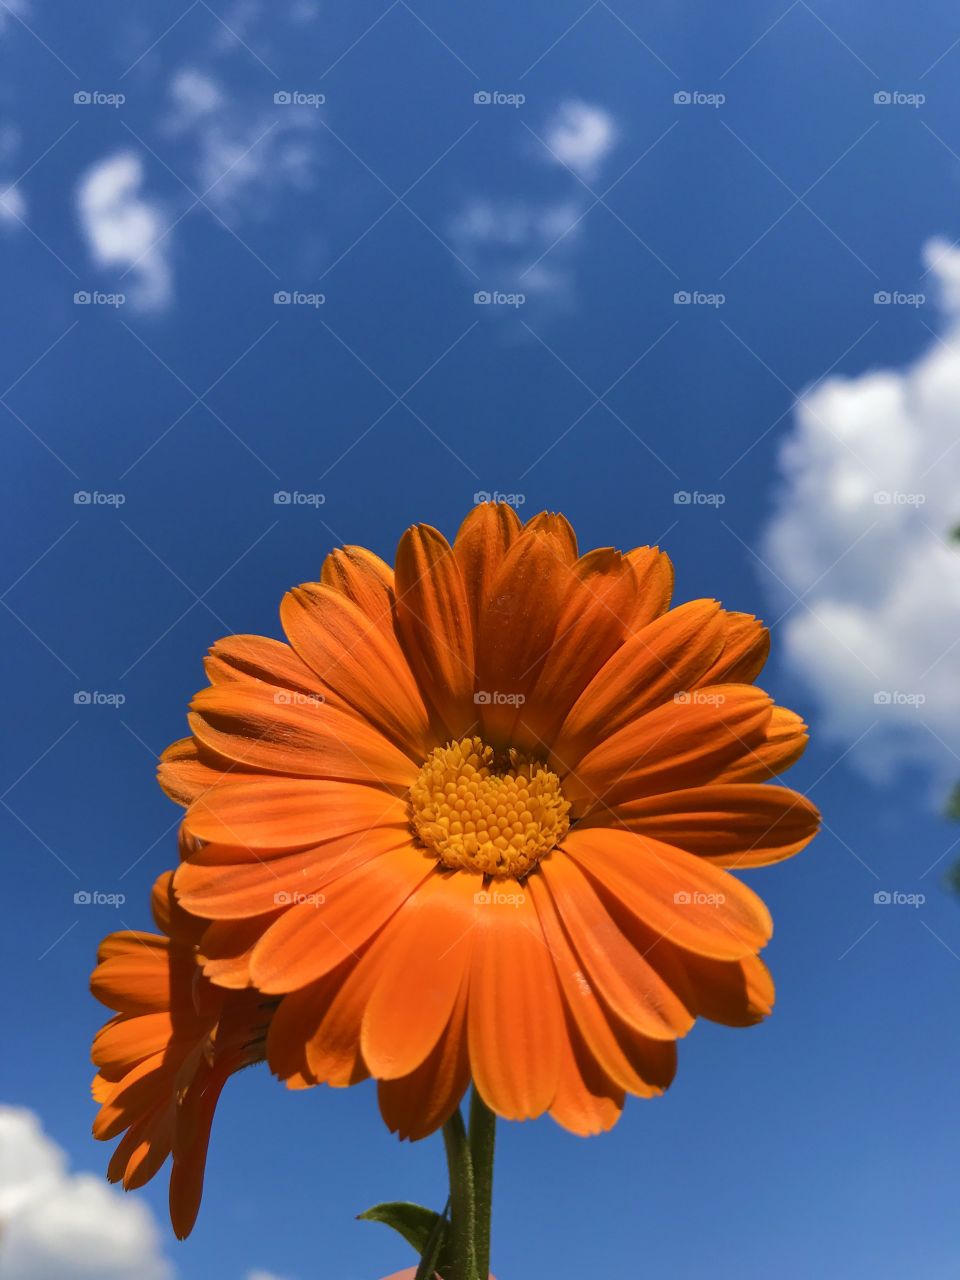 Orange marigold flowers and a blue sky with white clouds in the background.